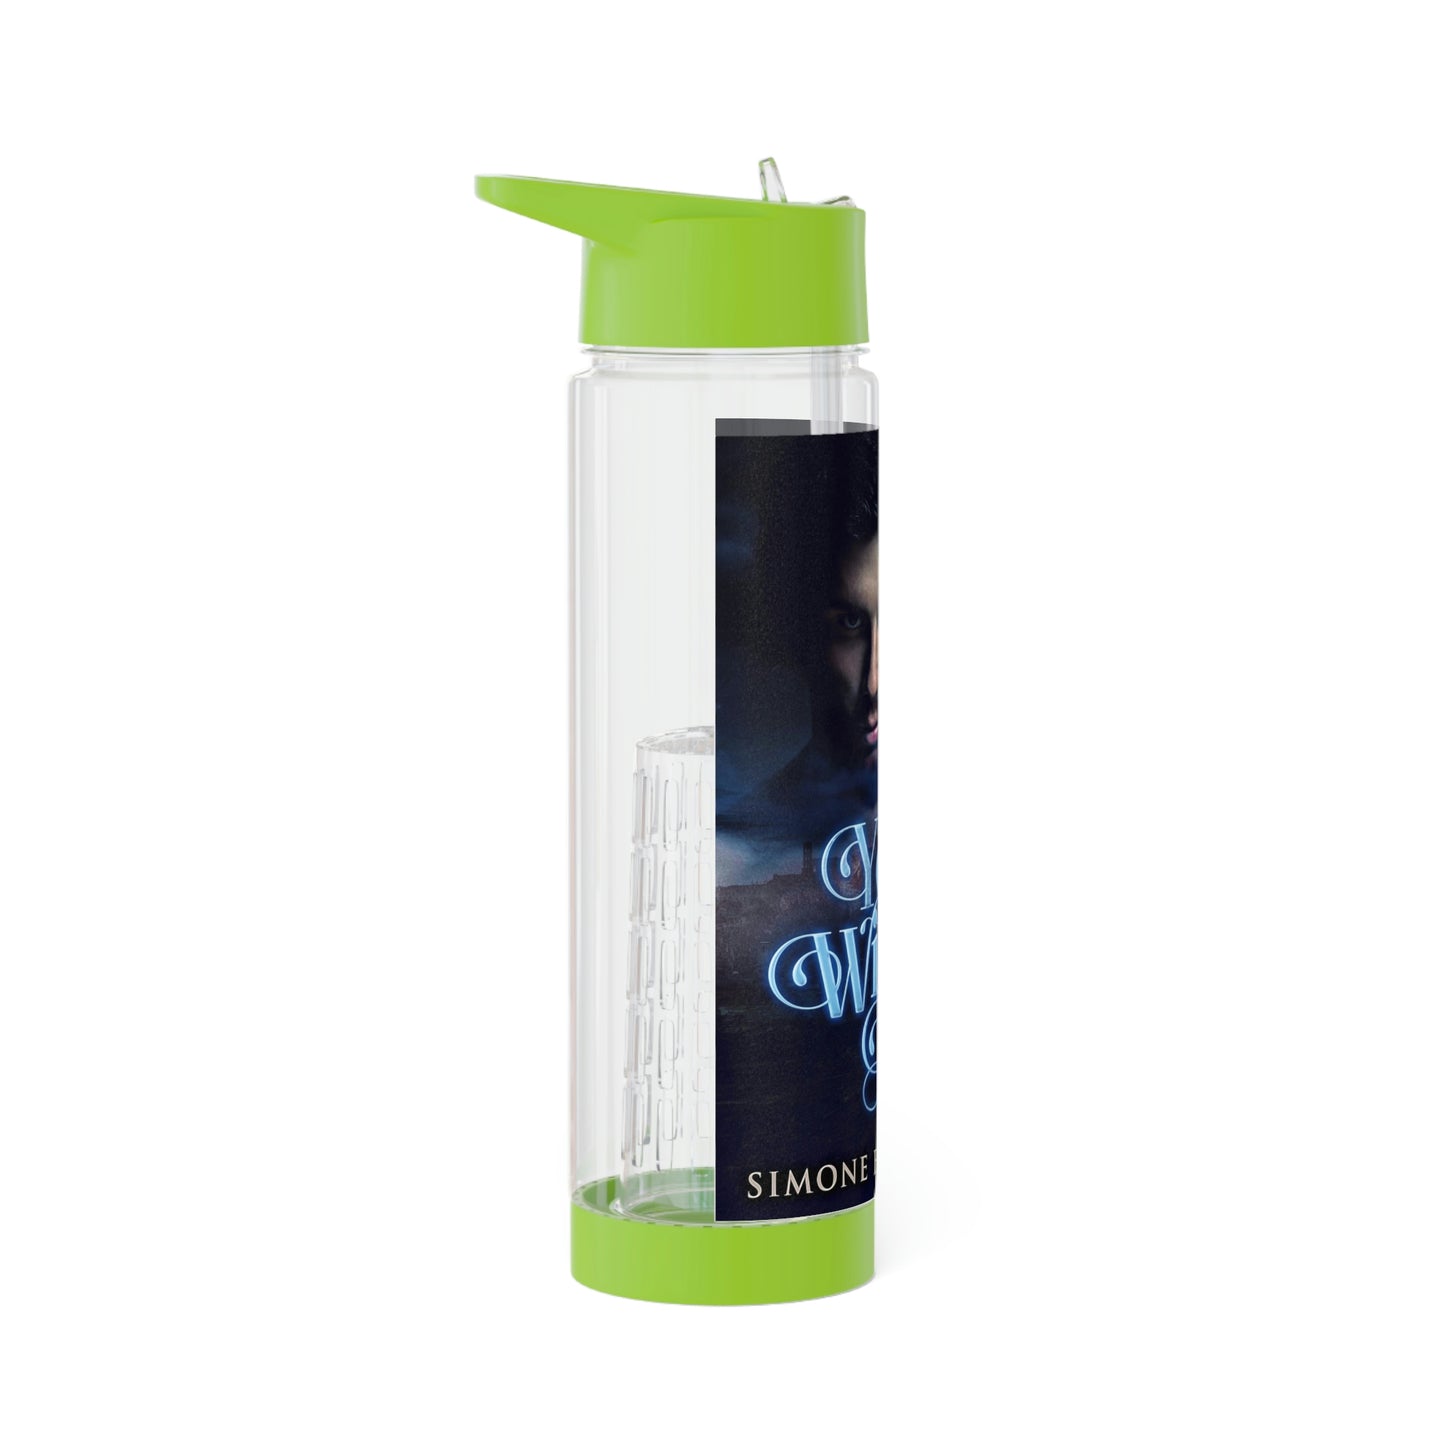 You Within Me - Infuser Water Bottle